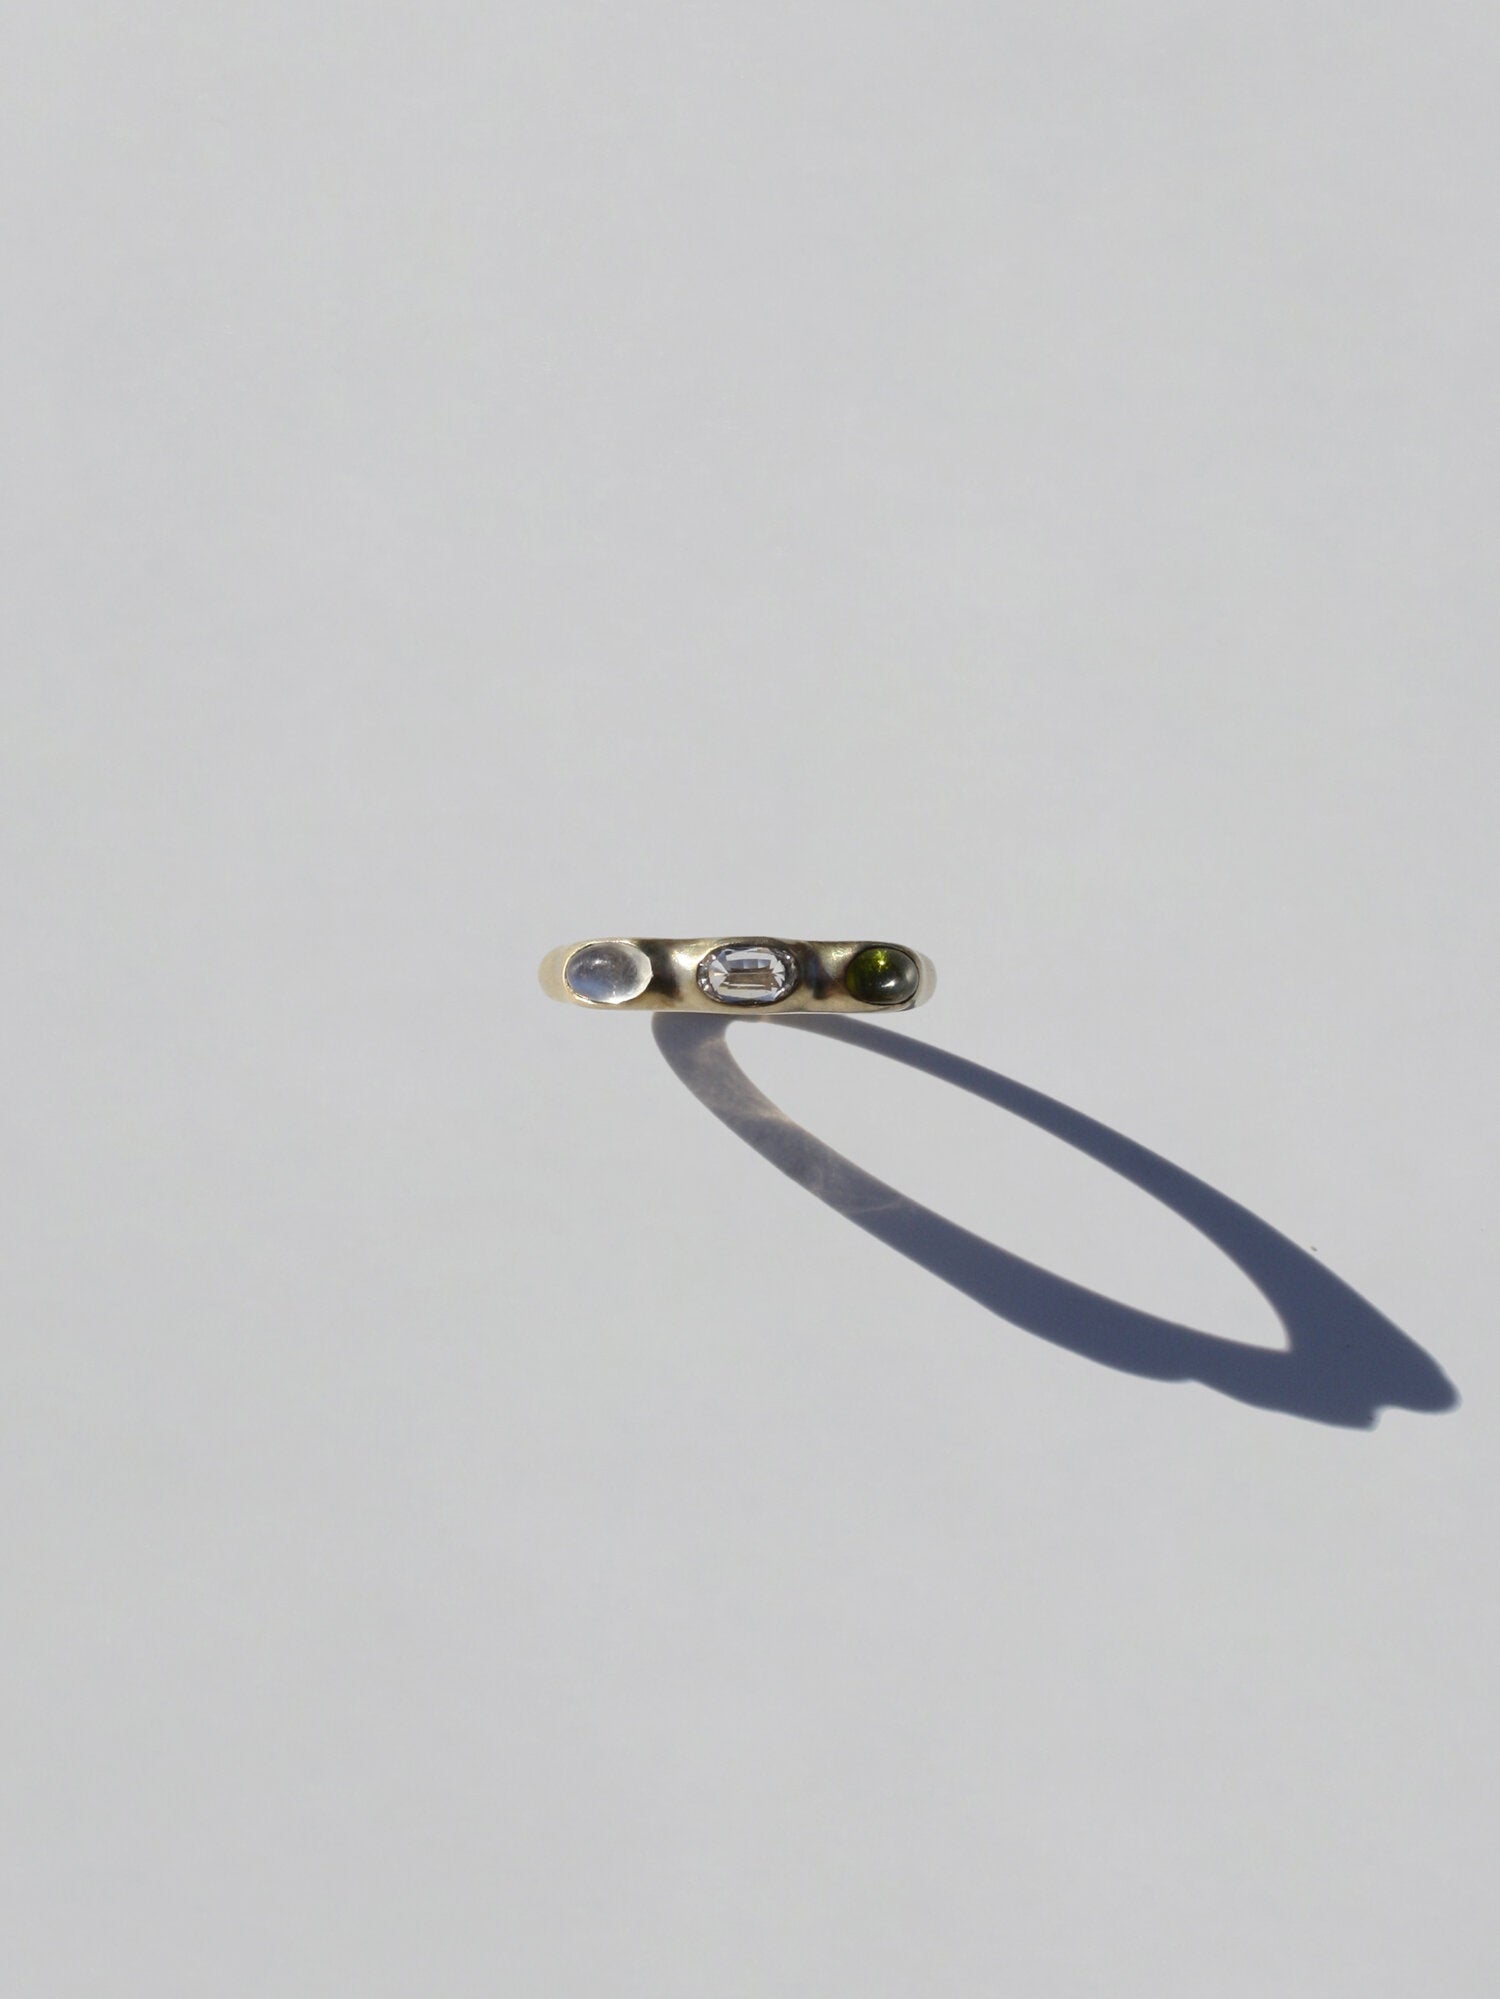 Cyril Relic Ring